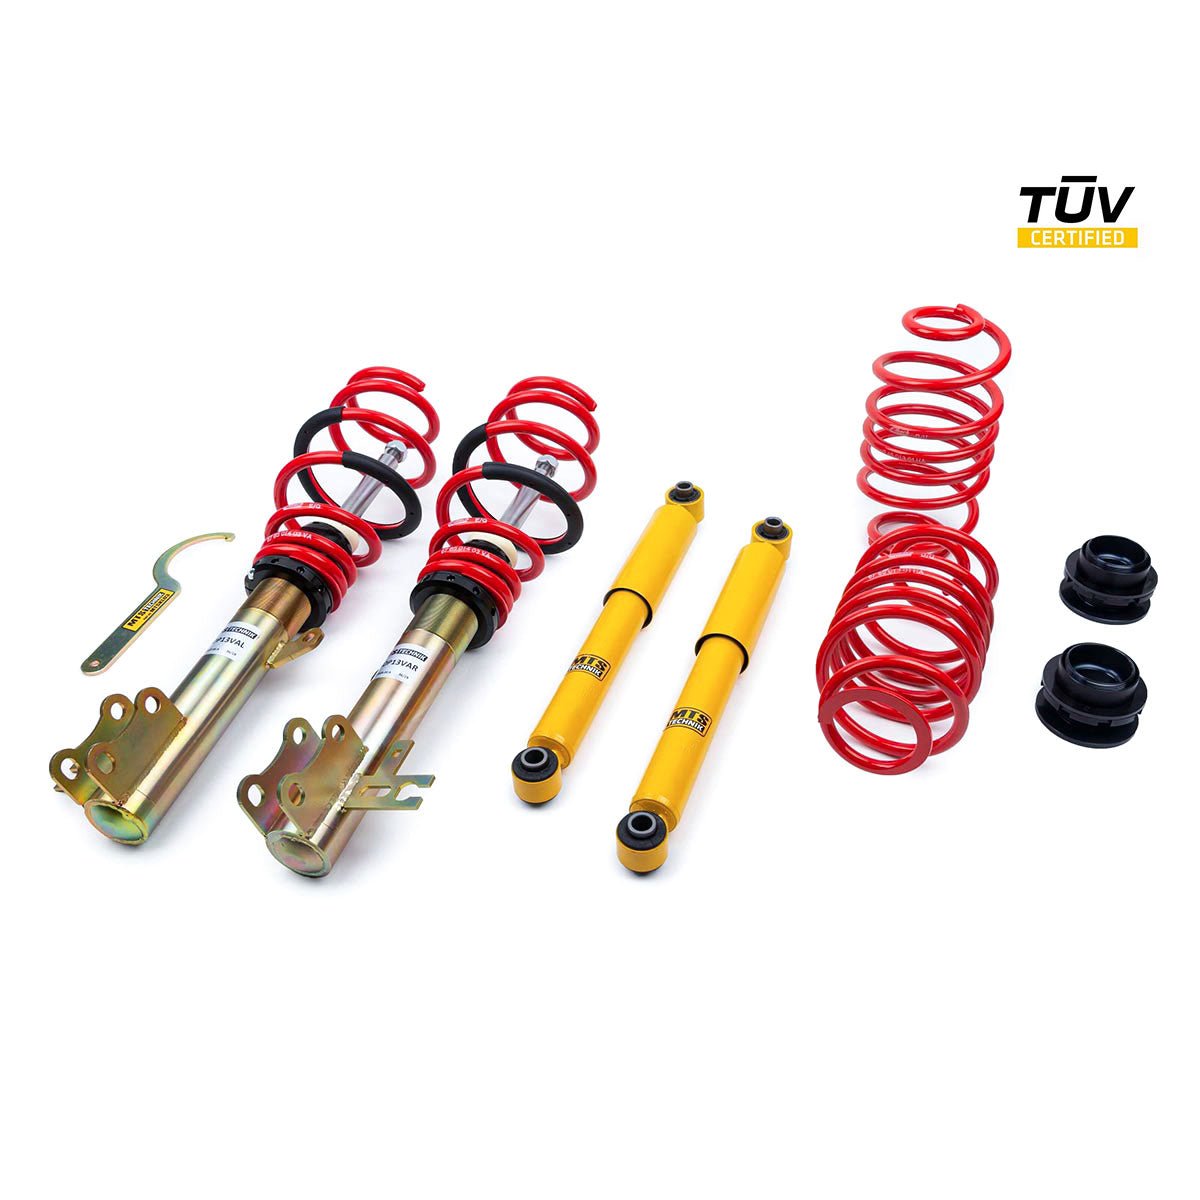 MTS TECHNIK coilover kit STREET Opel Astra H Limousine (with TÜV) - PARTS33 GmbH